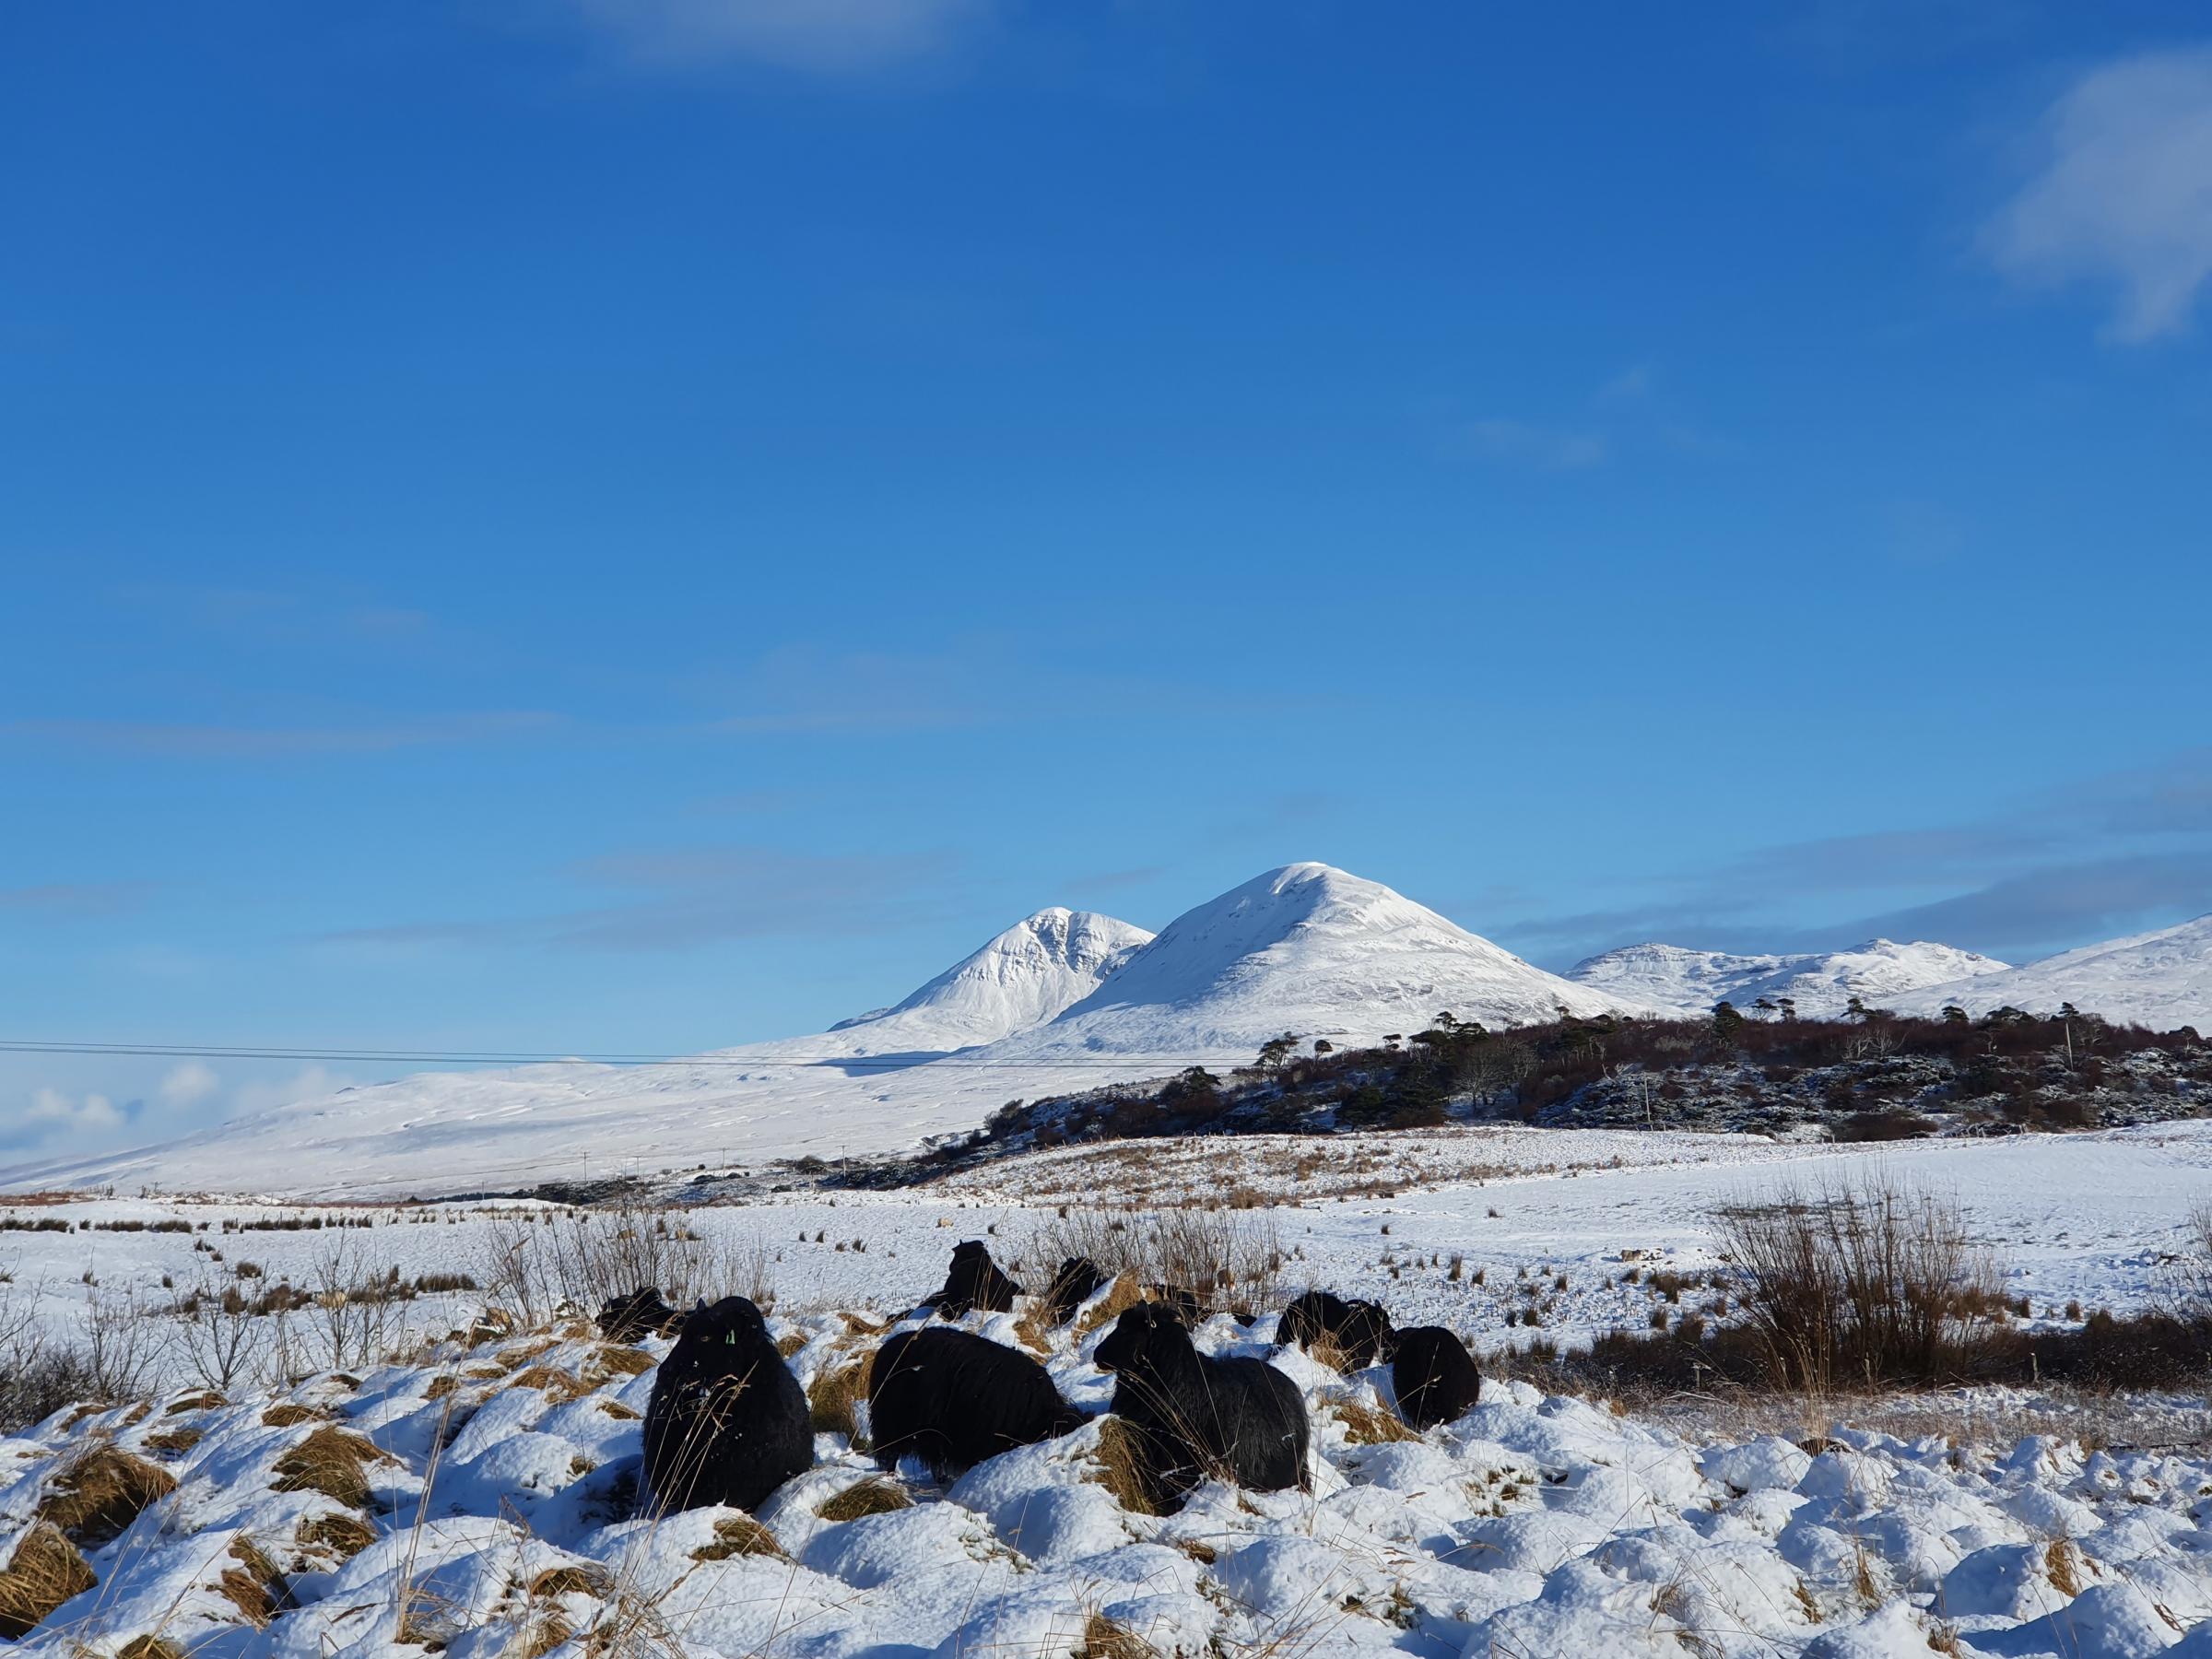 Hebridean sheep in the foreground and snow-covered paps of Jura in the background ... how much more festive can it get at Persabus?